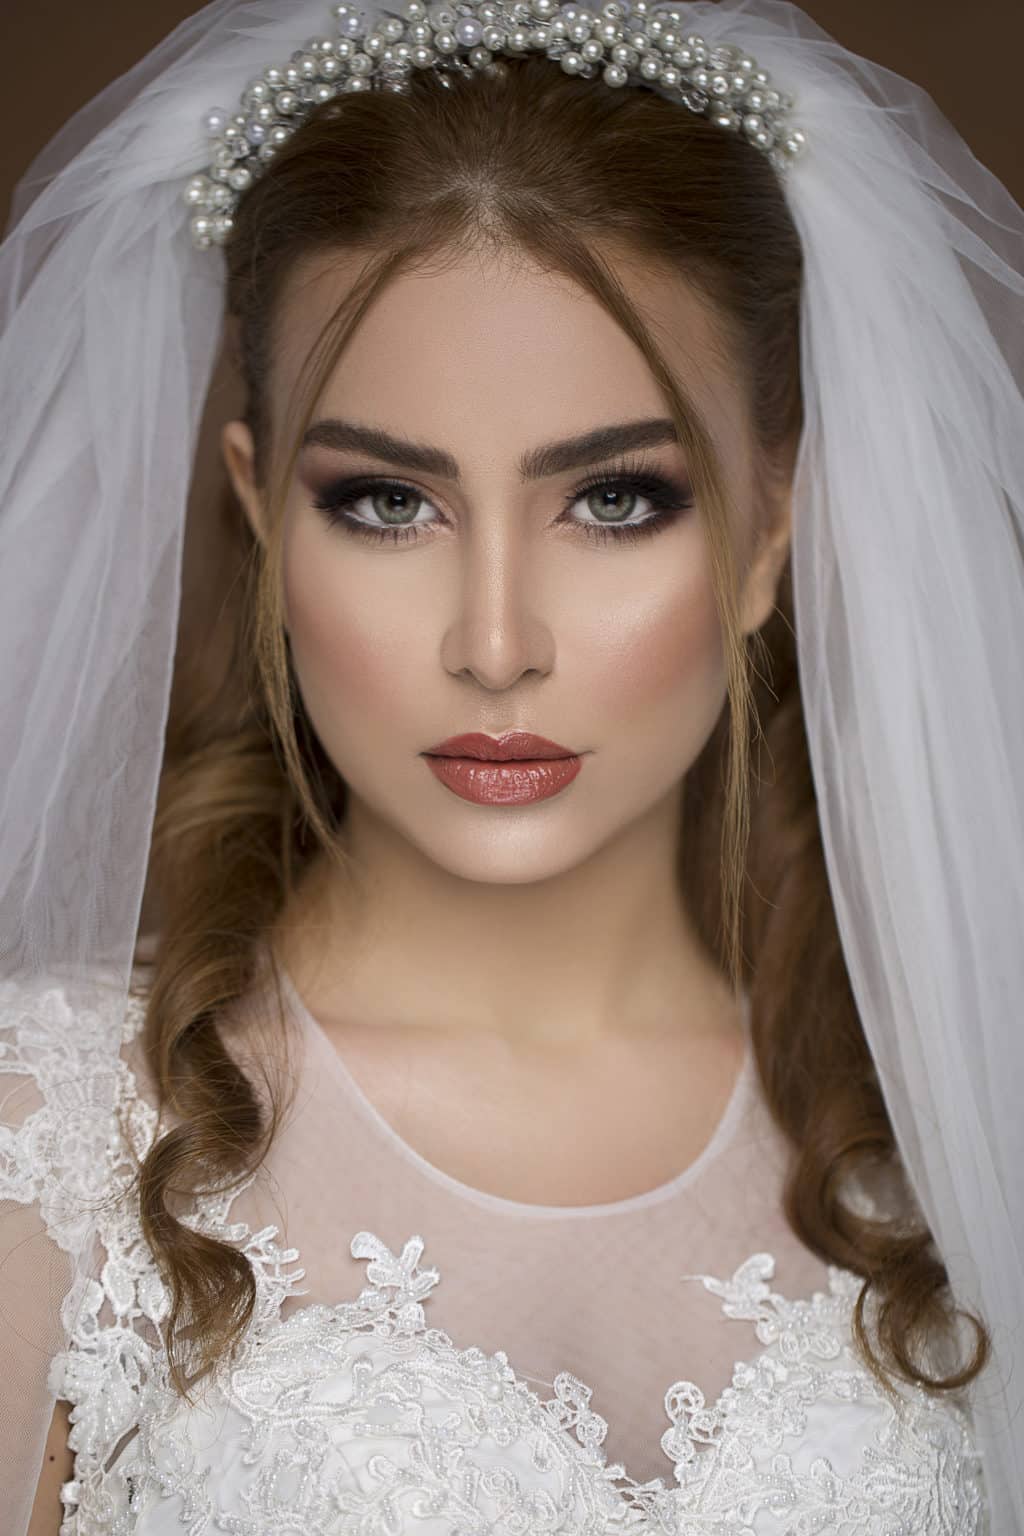 Blond model in wedding dress and bridal makeup